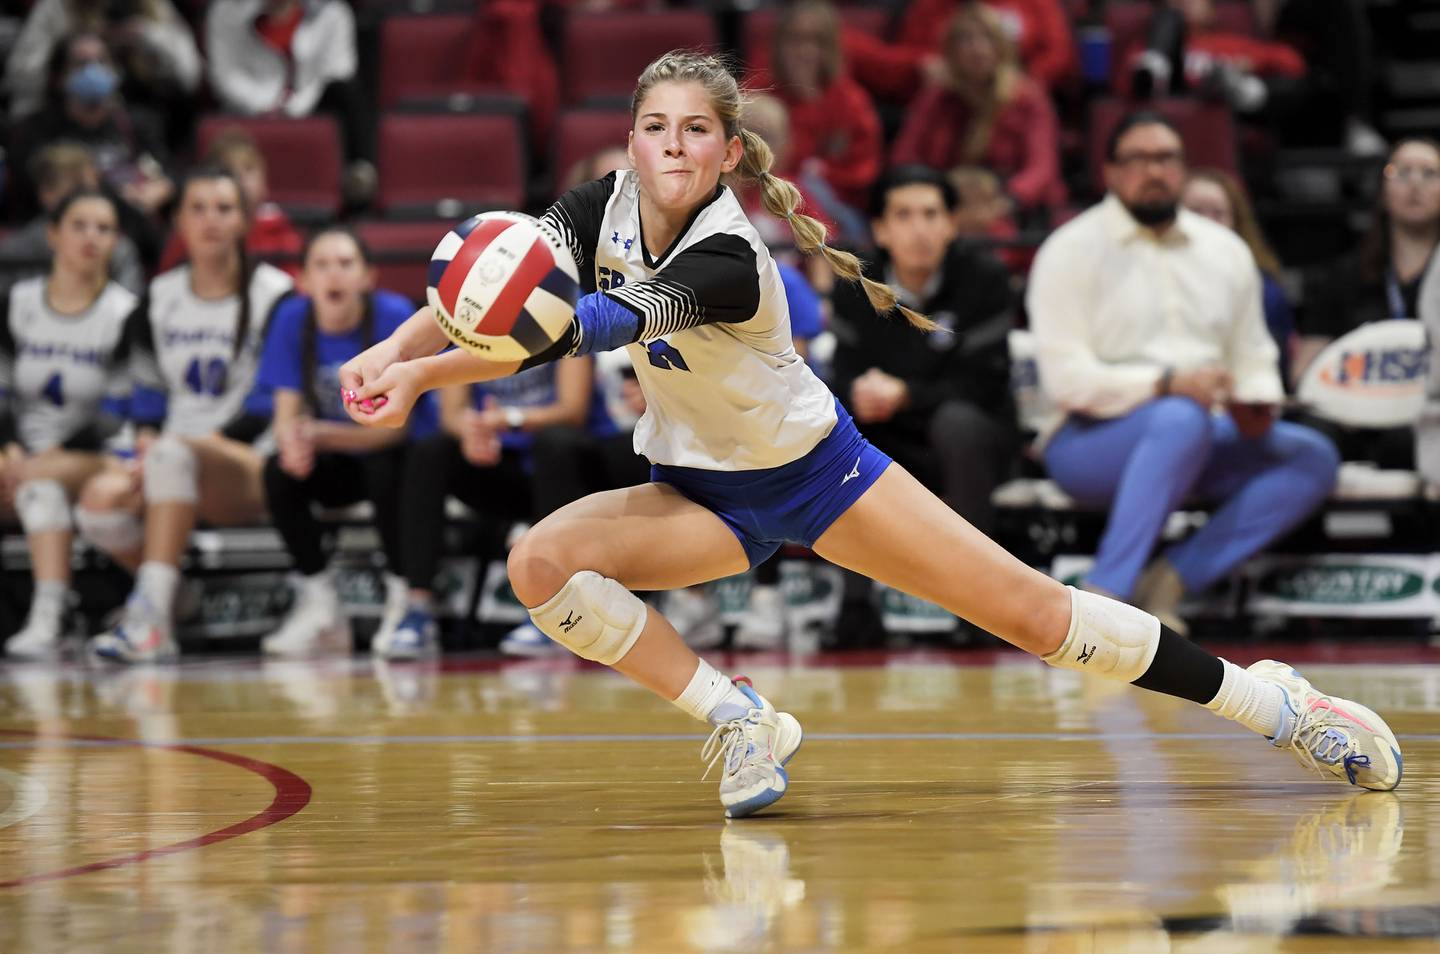 St. Francis’ Anna Paquette reaches for a shot by Lincoln in the Class 3A girls volleyball state championship match at Illinois State University in Normal on Saturday, October 11, 2023.